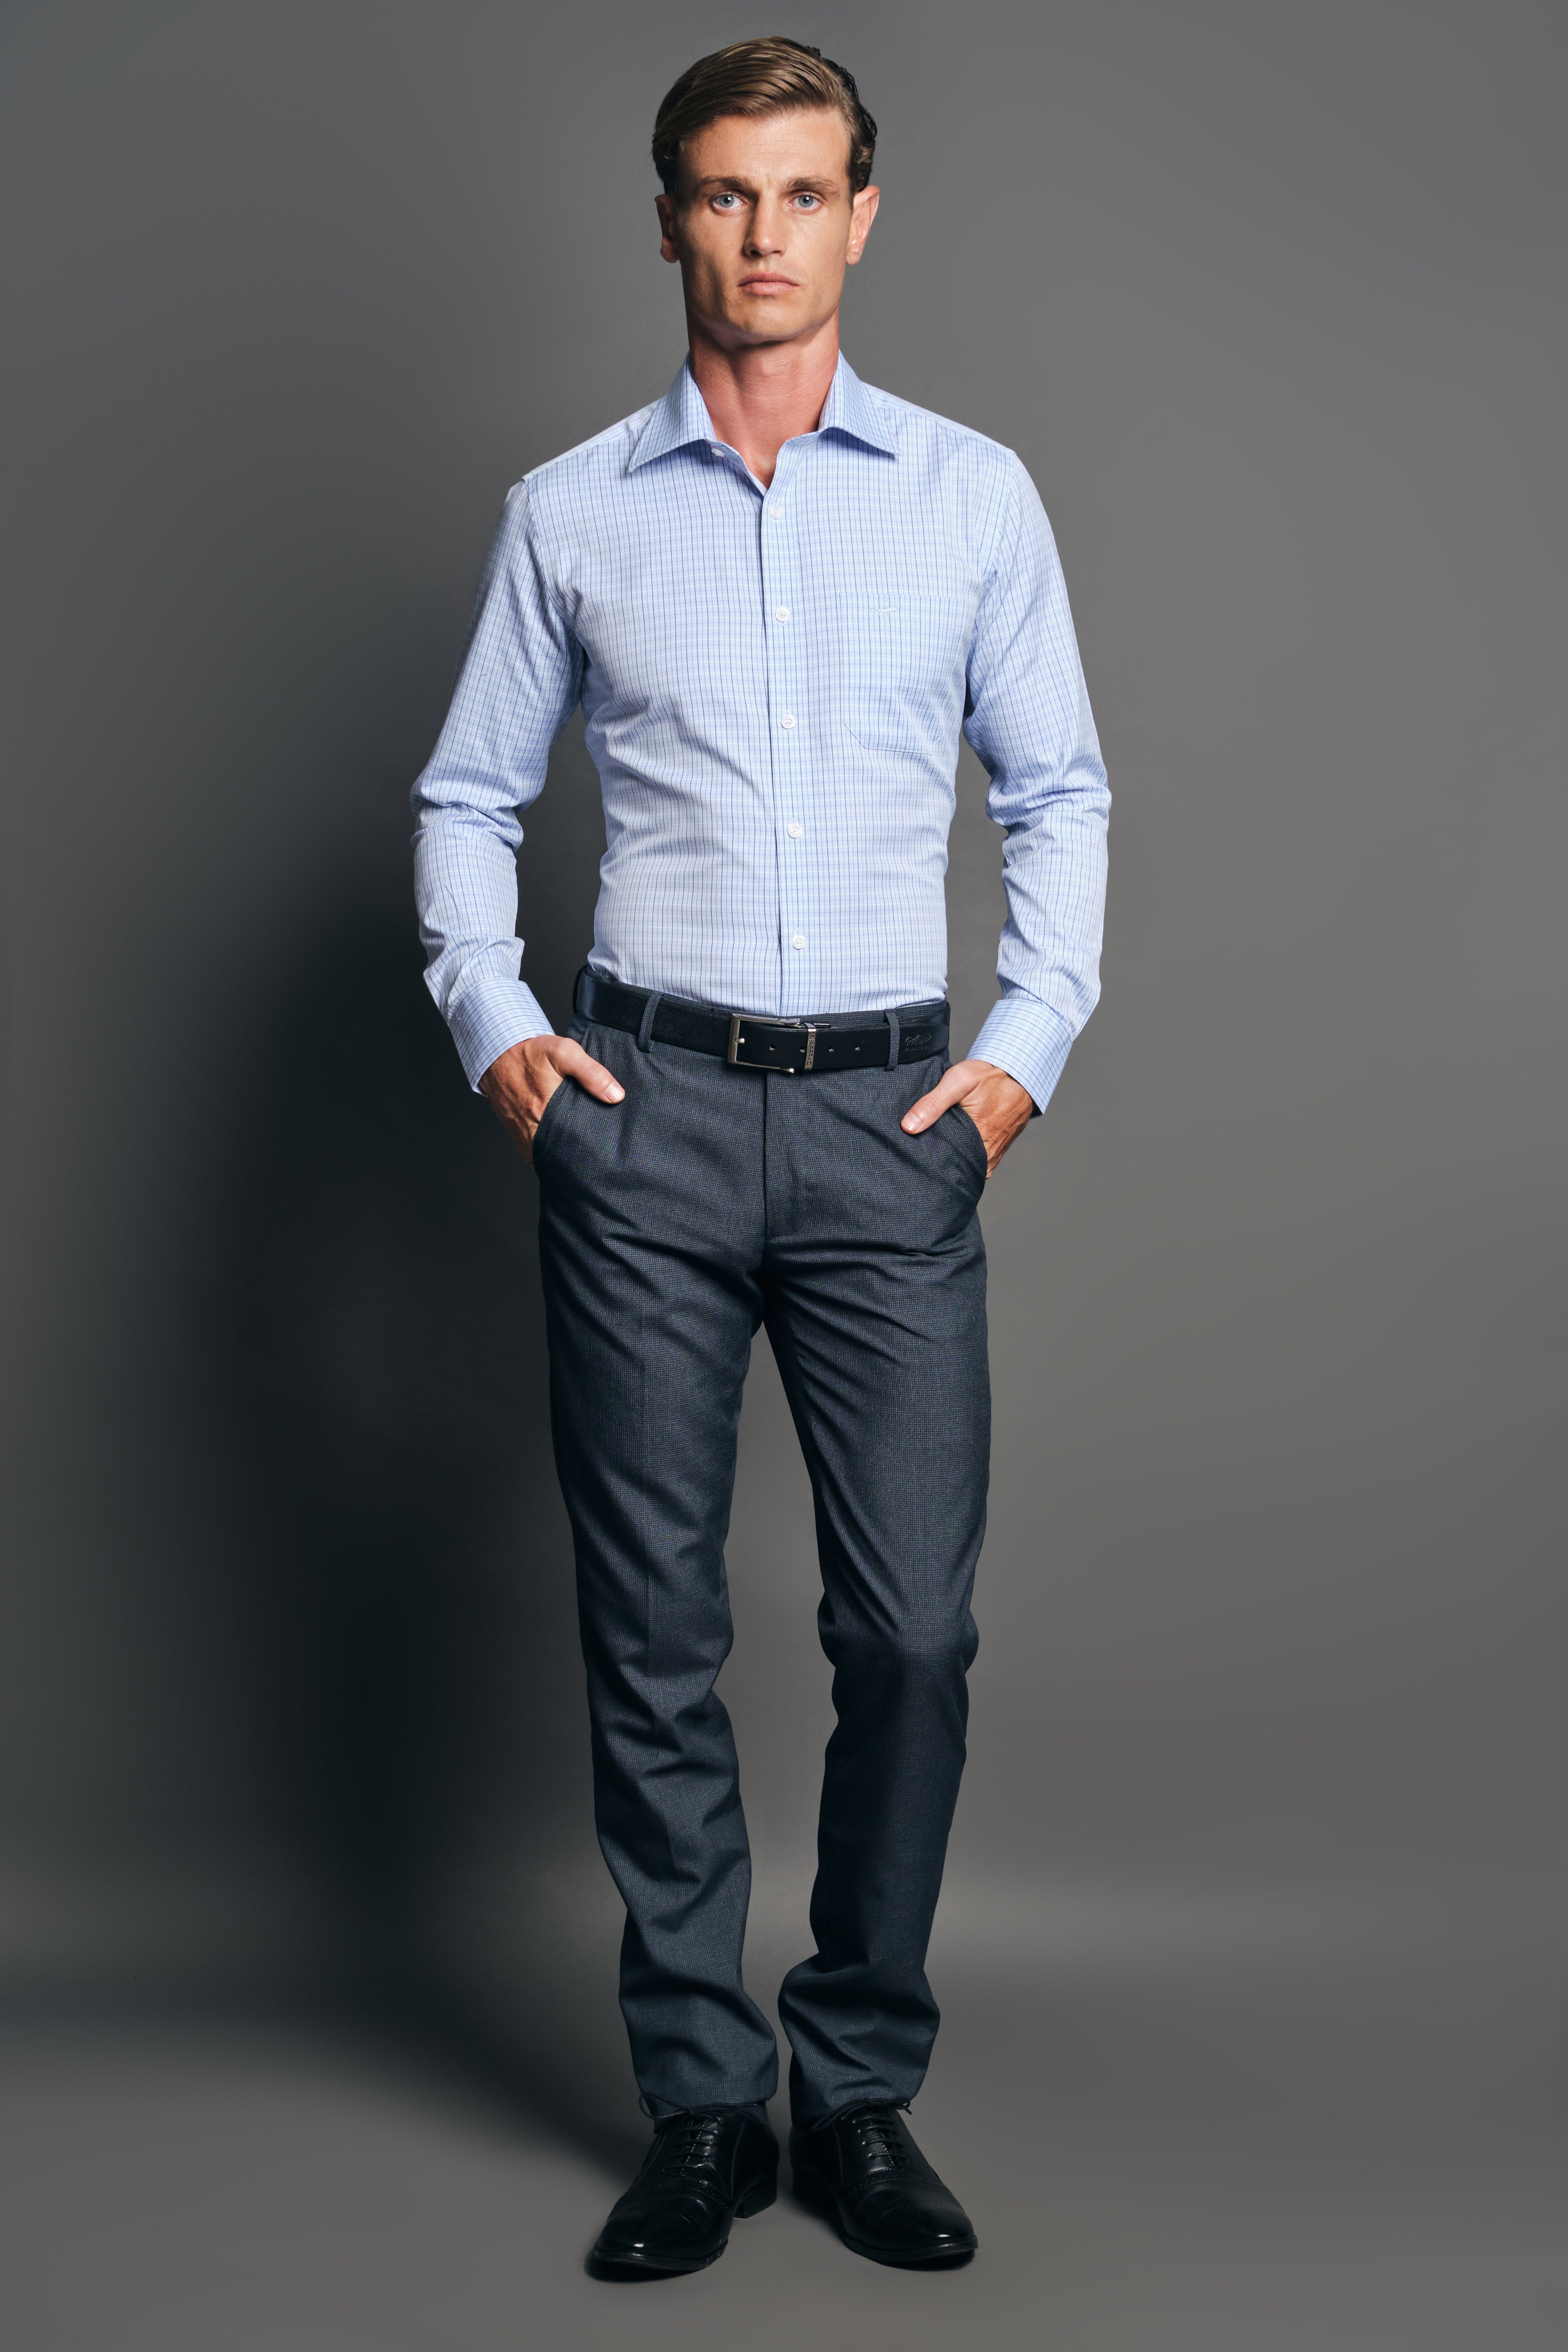 What is a good shirt to wear with dark gray dress pants? - Quora